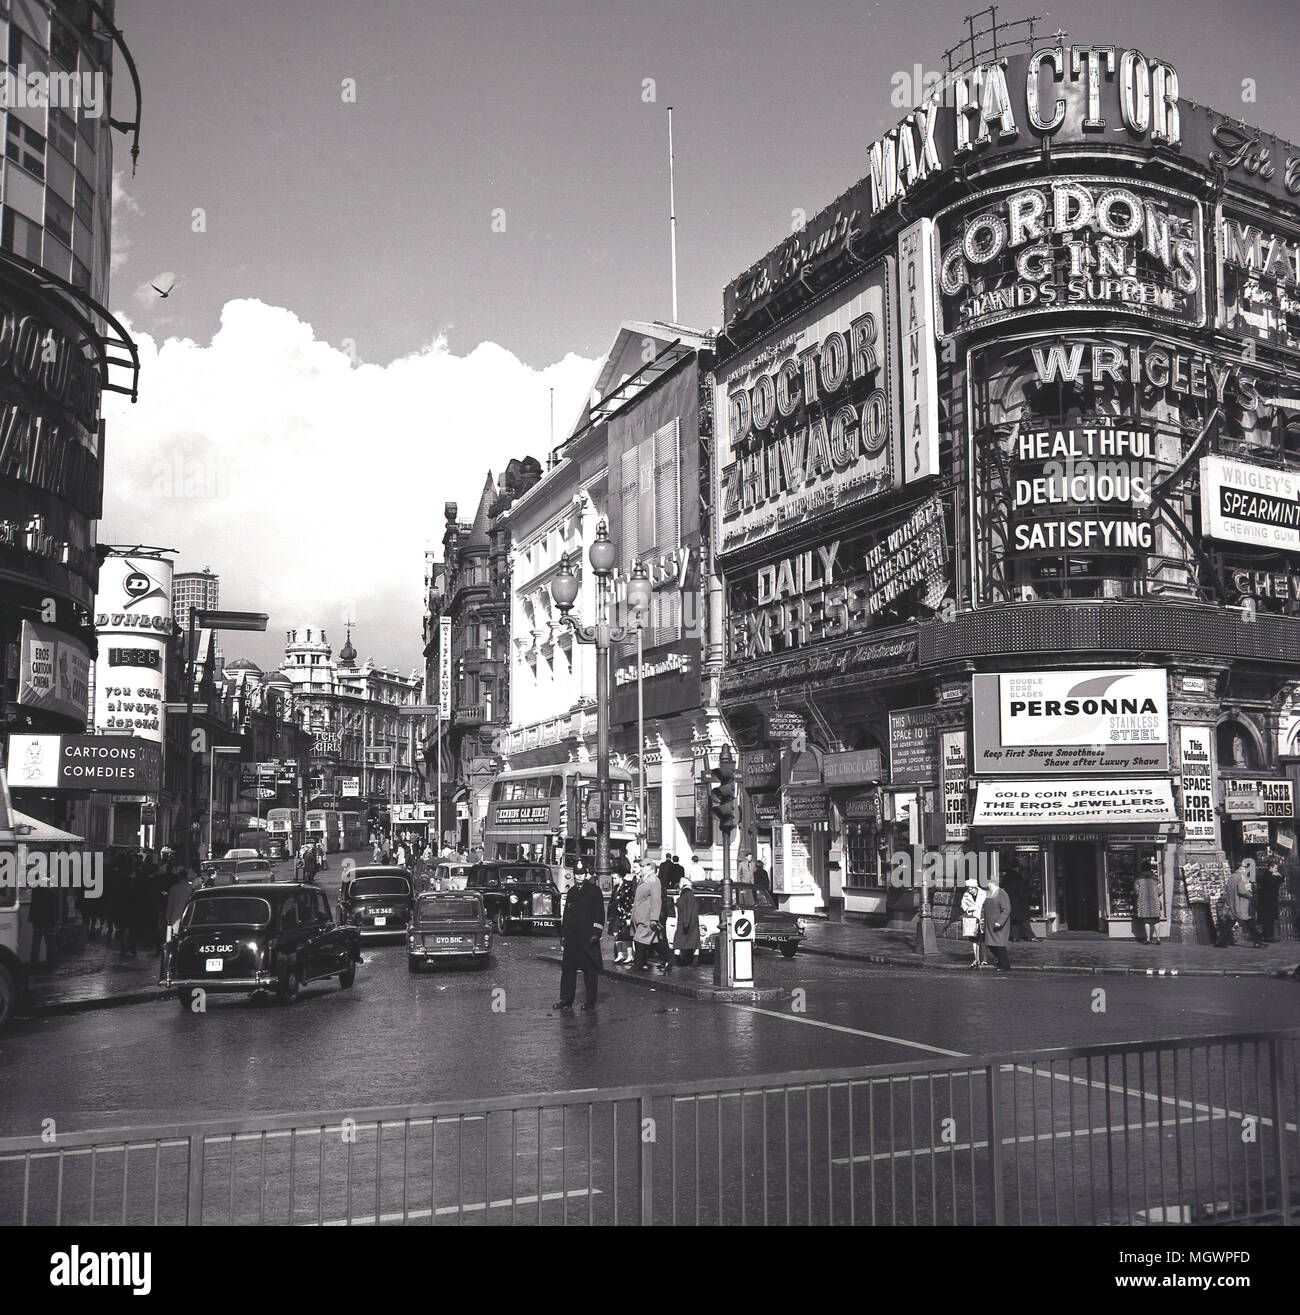 1966, historical picture showing a view up Shaftesbury Avenue at Piccadilly Circus, with advertising billboards for famous brands, Max Factor, Wrigley's and The Daily Express. Also advertised is the film, Doctor Zhivago staring Omar Sharif and Julie Christie and directed by David Lean, London, England, UK. Stock Photo